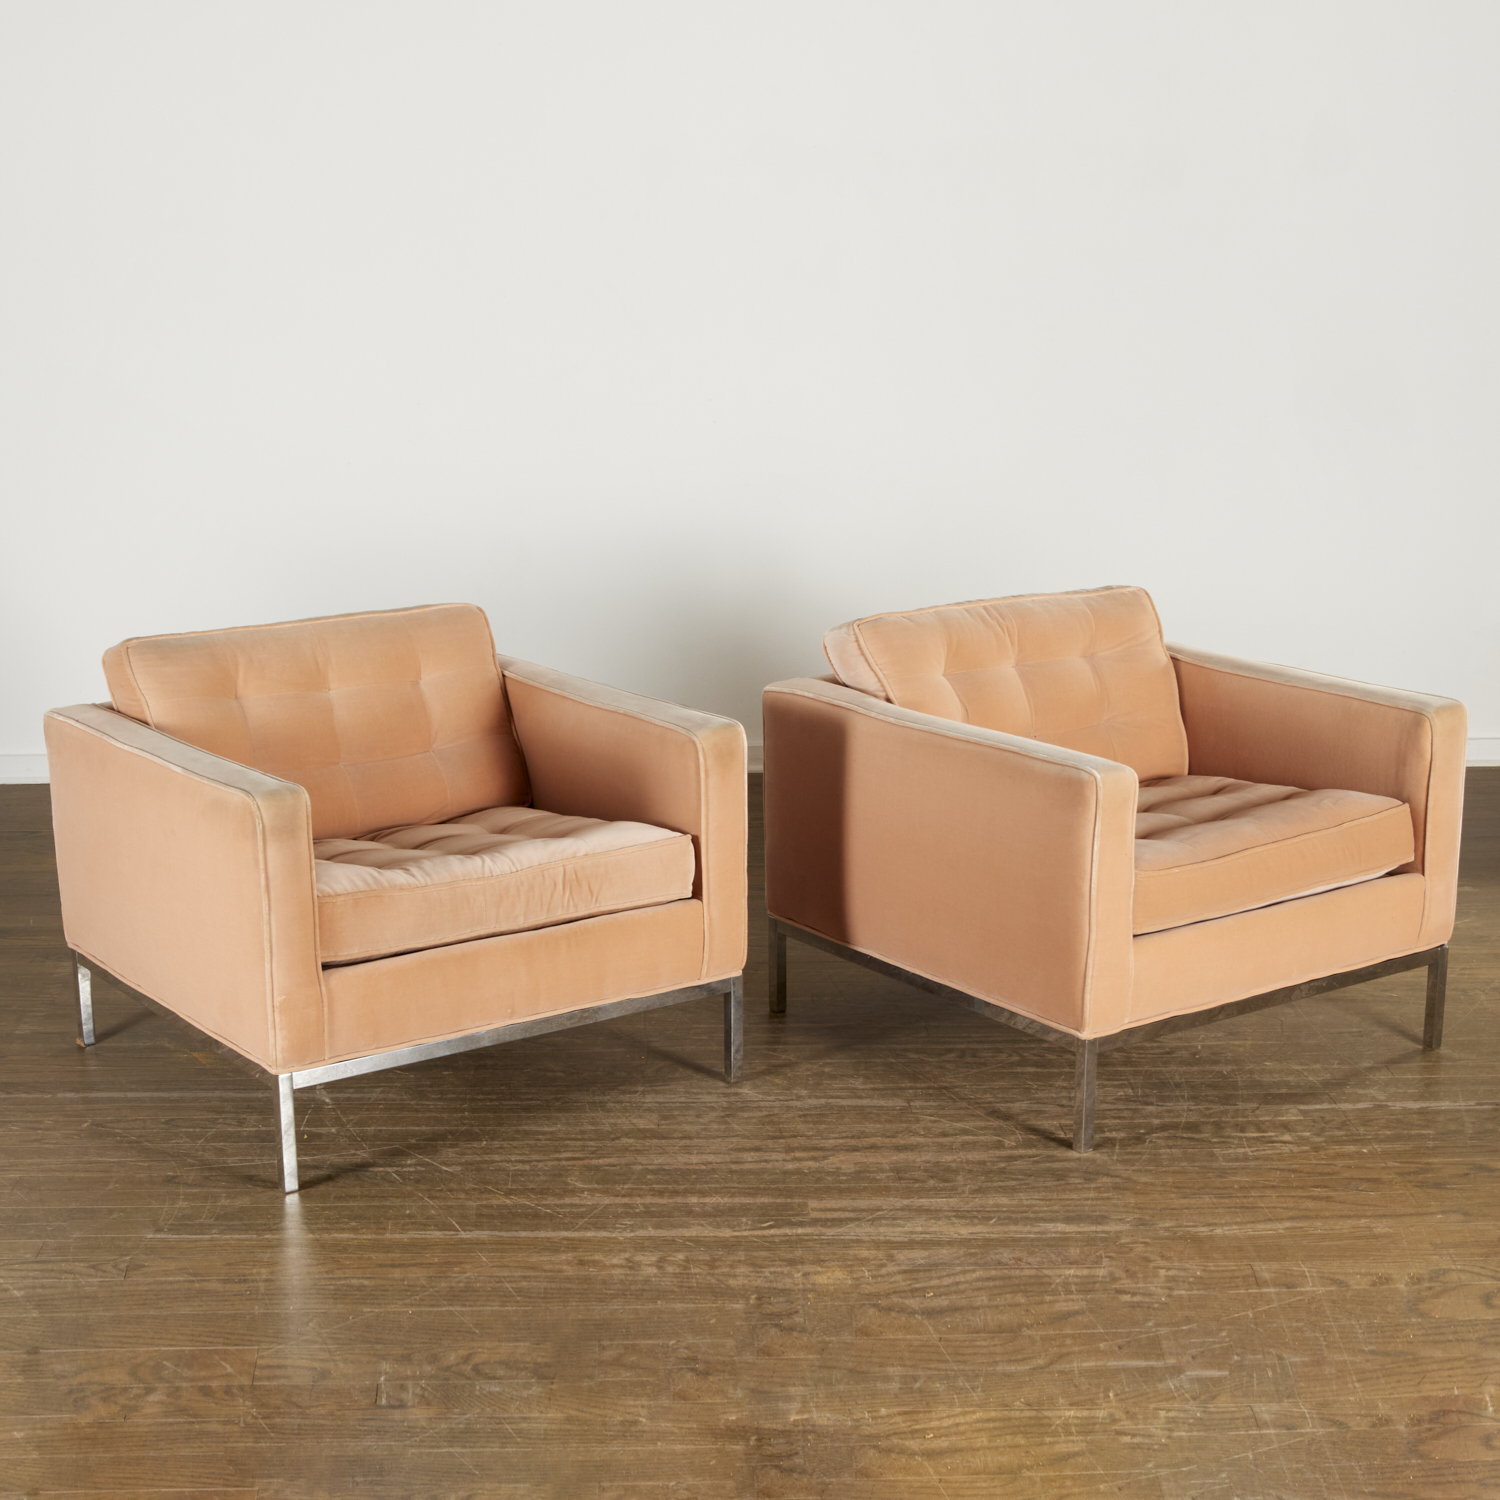 FLORENCE KNOLL PAIR LOUNGE ARMCHAIRS 3c24ea